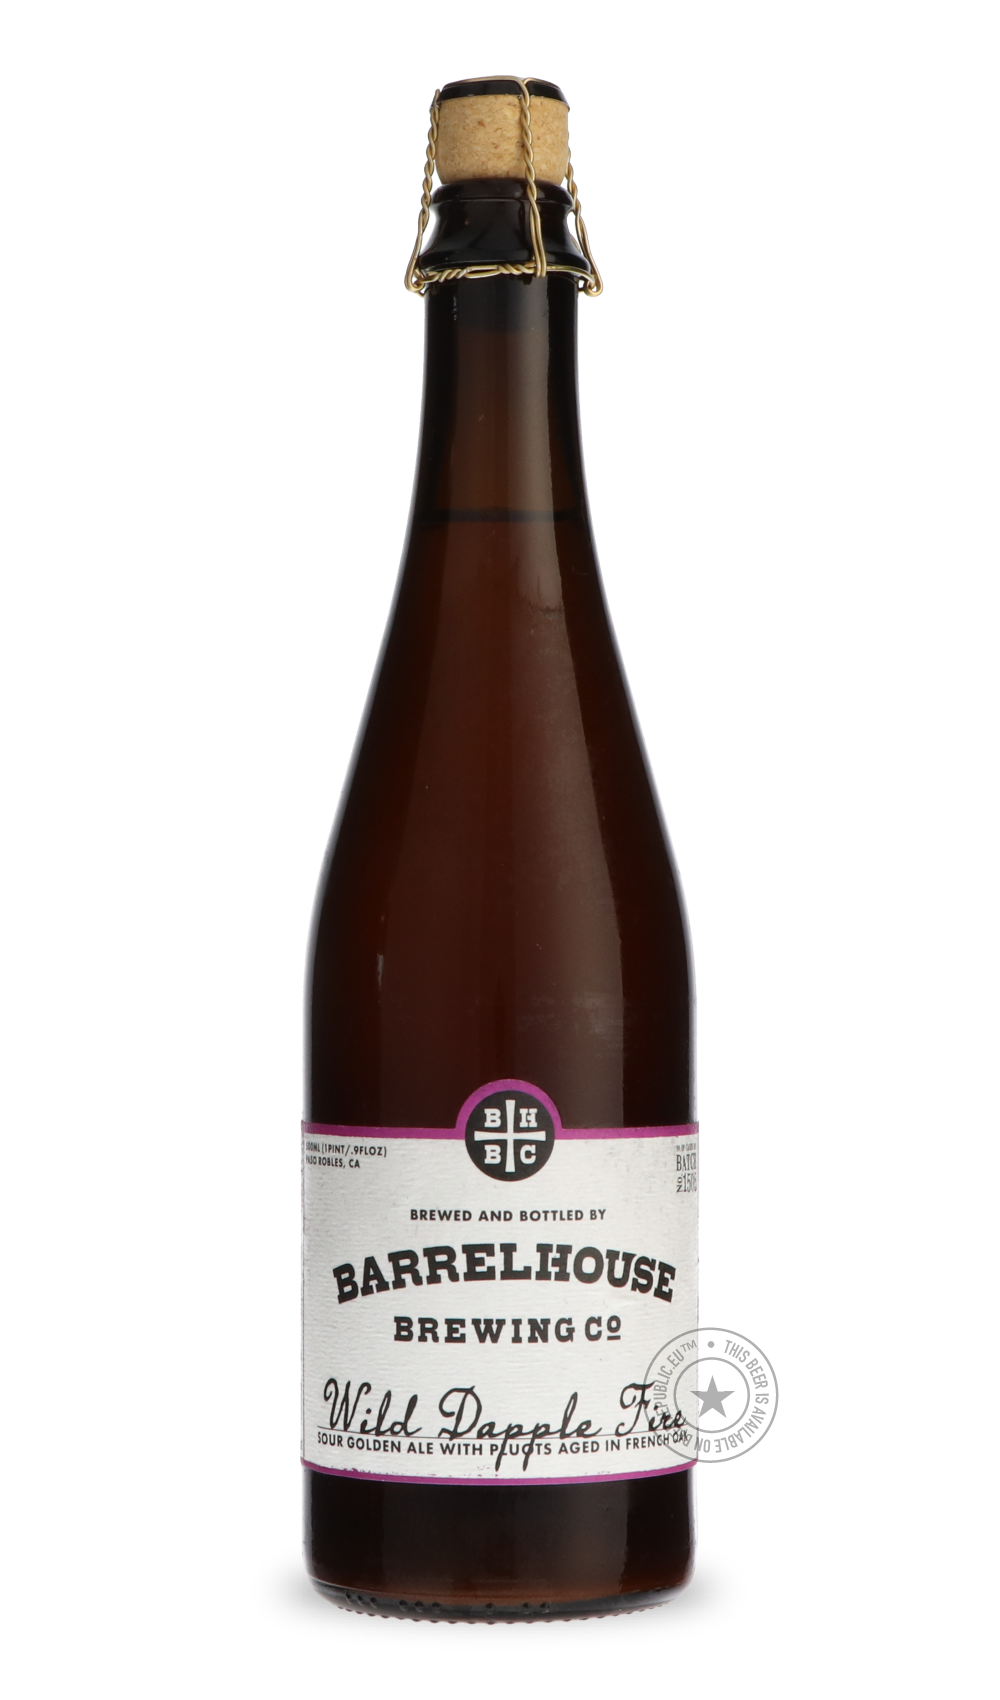 -BarrelHouse- Wild Dapple Fire-Sour / Wild & Fruity- Only @ Beer Republic - The best online beer store for American & Canadian craft beer - Buy beer online from the USA and Canada - Bier online kopen - Amerikaans bier kopen - Craft beer store - Craft beer kopen - Amerikanisch bier kaufen - Bier online kaufen - Acheter biere online - IPA - Stout - Porter - New England IPA - Hazy IPA - Imperial Stout - Barrel Aged - Barrel Aged Imperial Stout - Brown - Dark beer - Blond - Blonde - Pilsner - Lager - Wheat - We